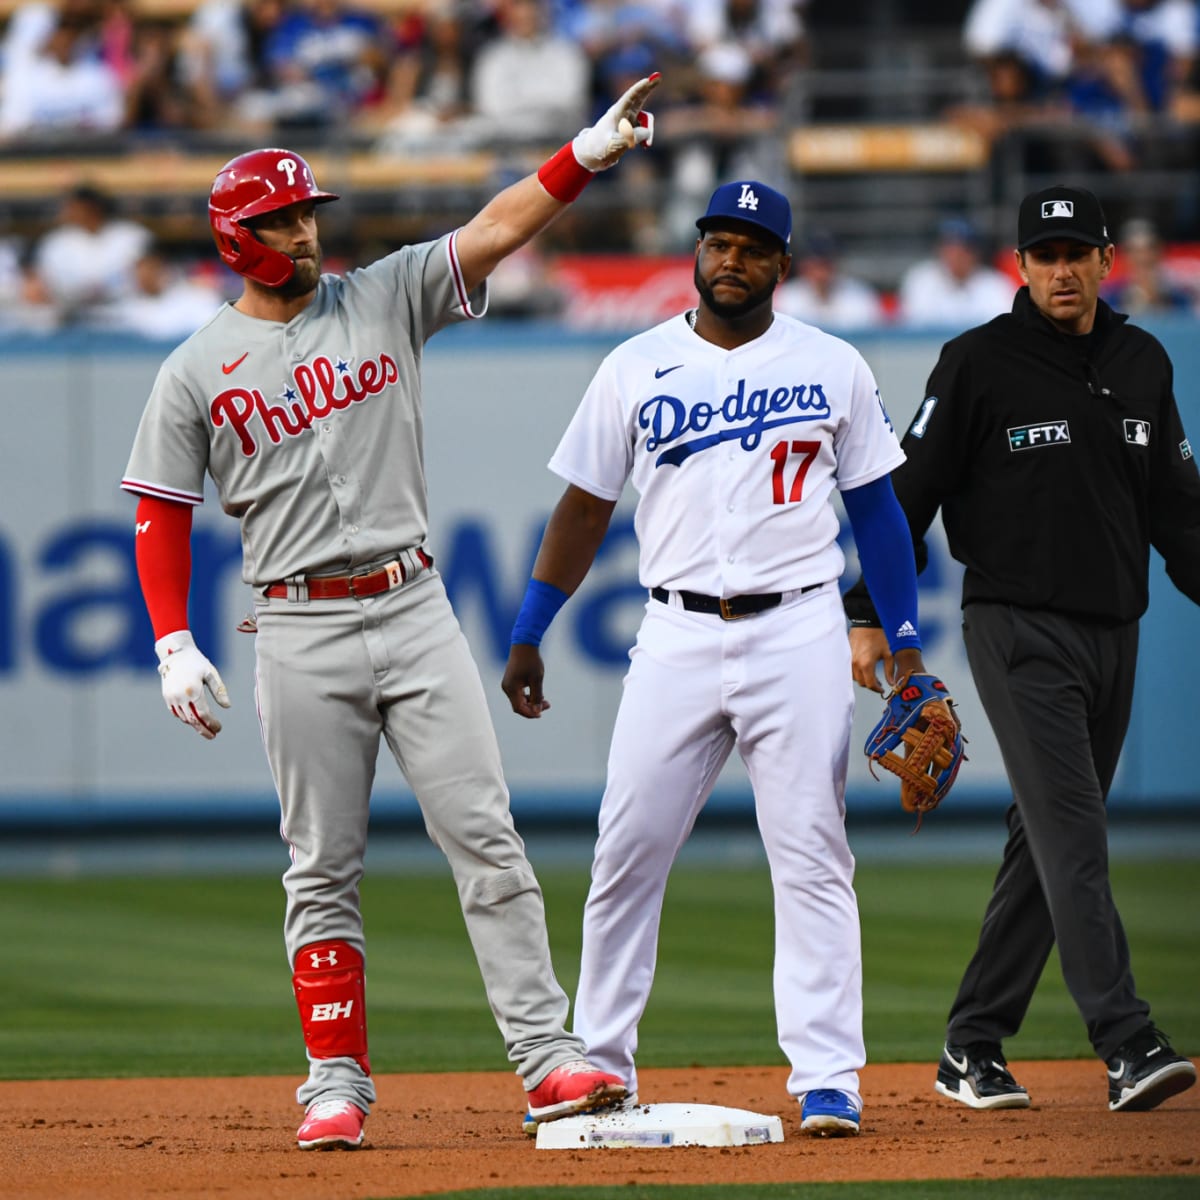 Phillies Defeat Dodgers to Take N.L.C.S. - The New York Times